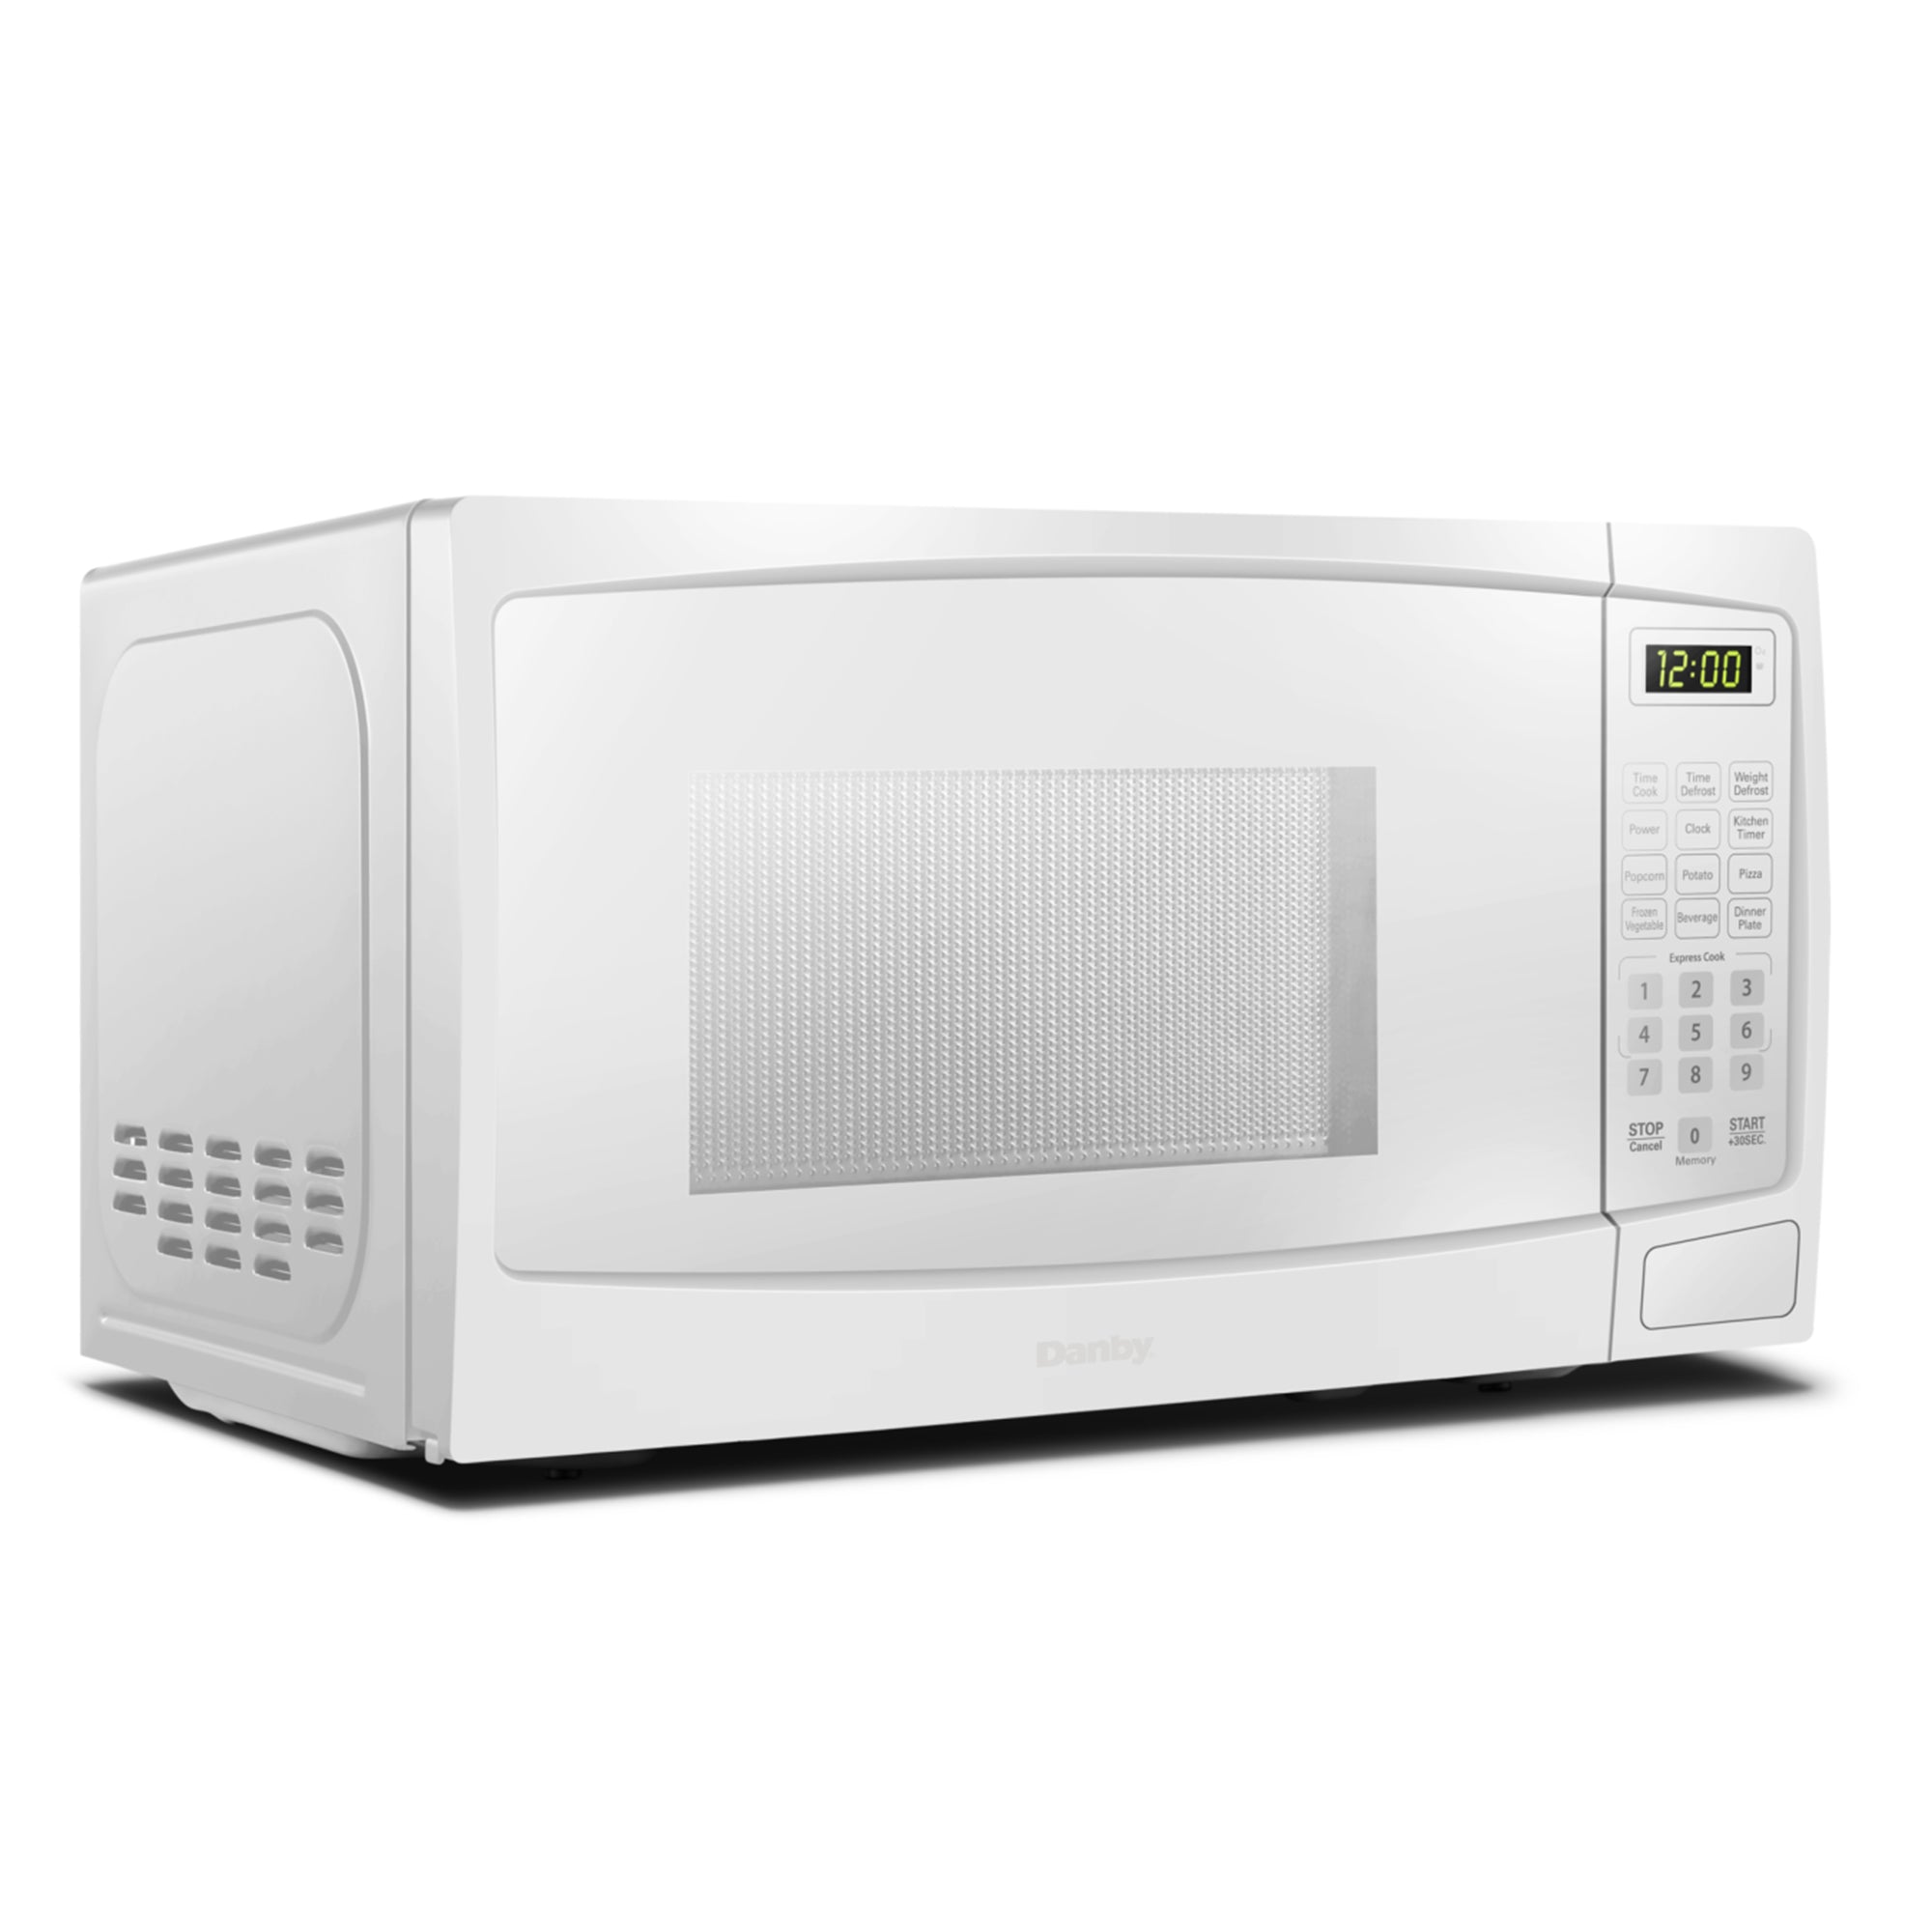 Danby - 0.7 cu. Ft  Counter top Microwave in White - DBMW0720BWW